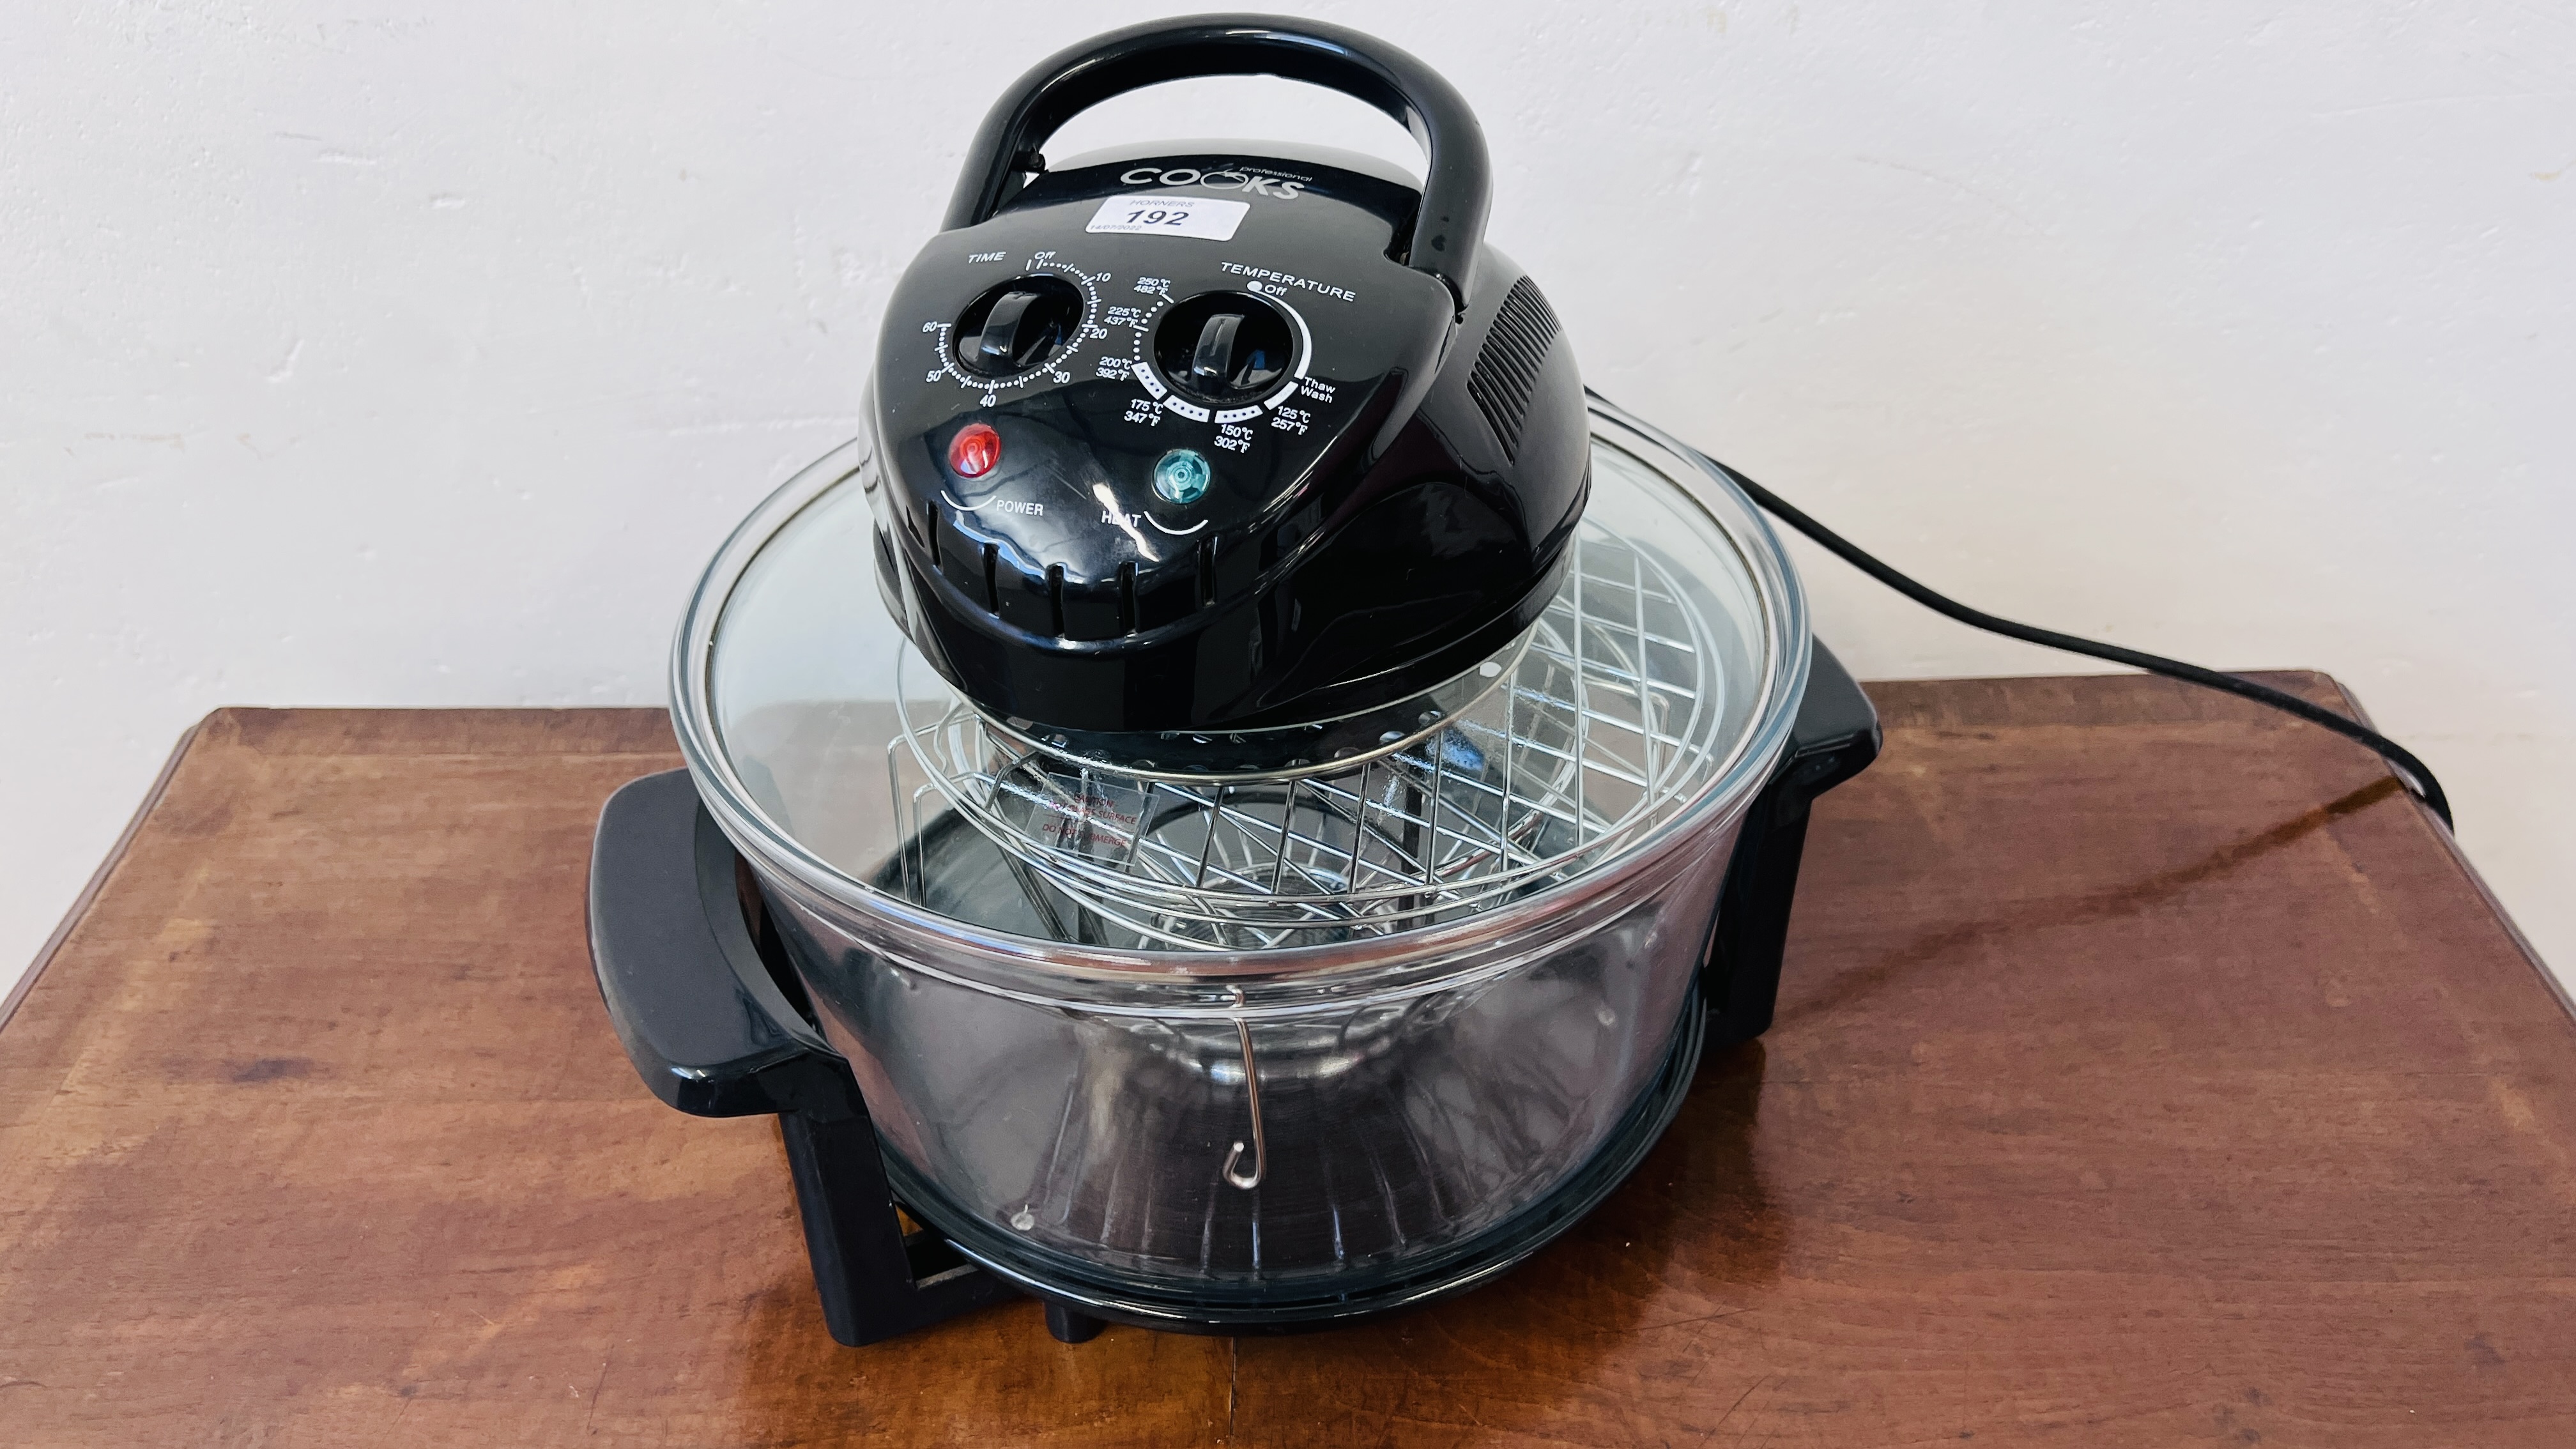 A PROFESSIONAL COOKS HALOGEN OVEN - SOLD AS SEEN.